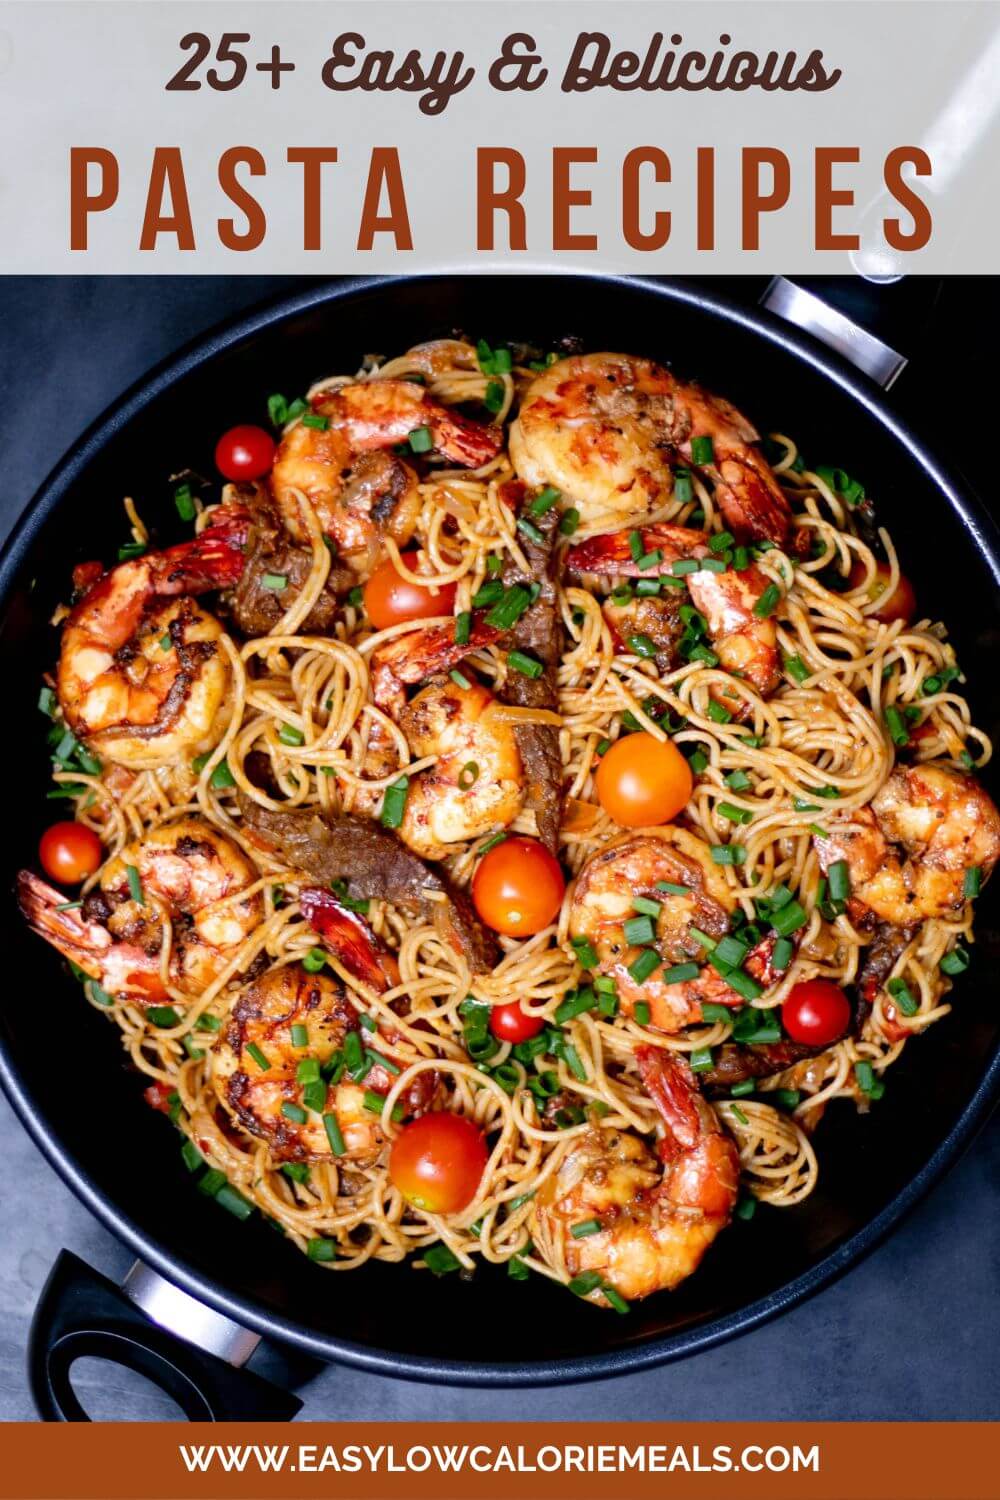 spaghetti pasta with shrimp in a black pan, garnished with spring onions.